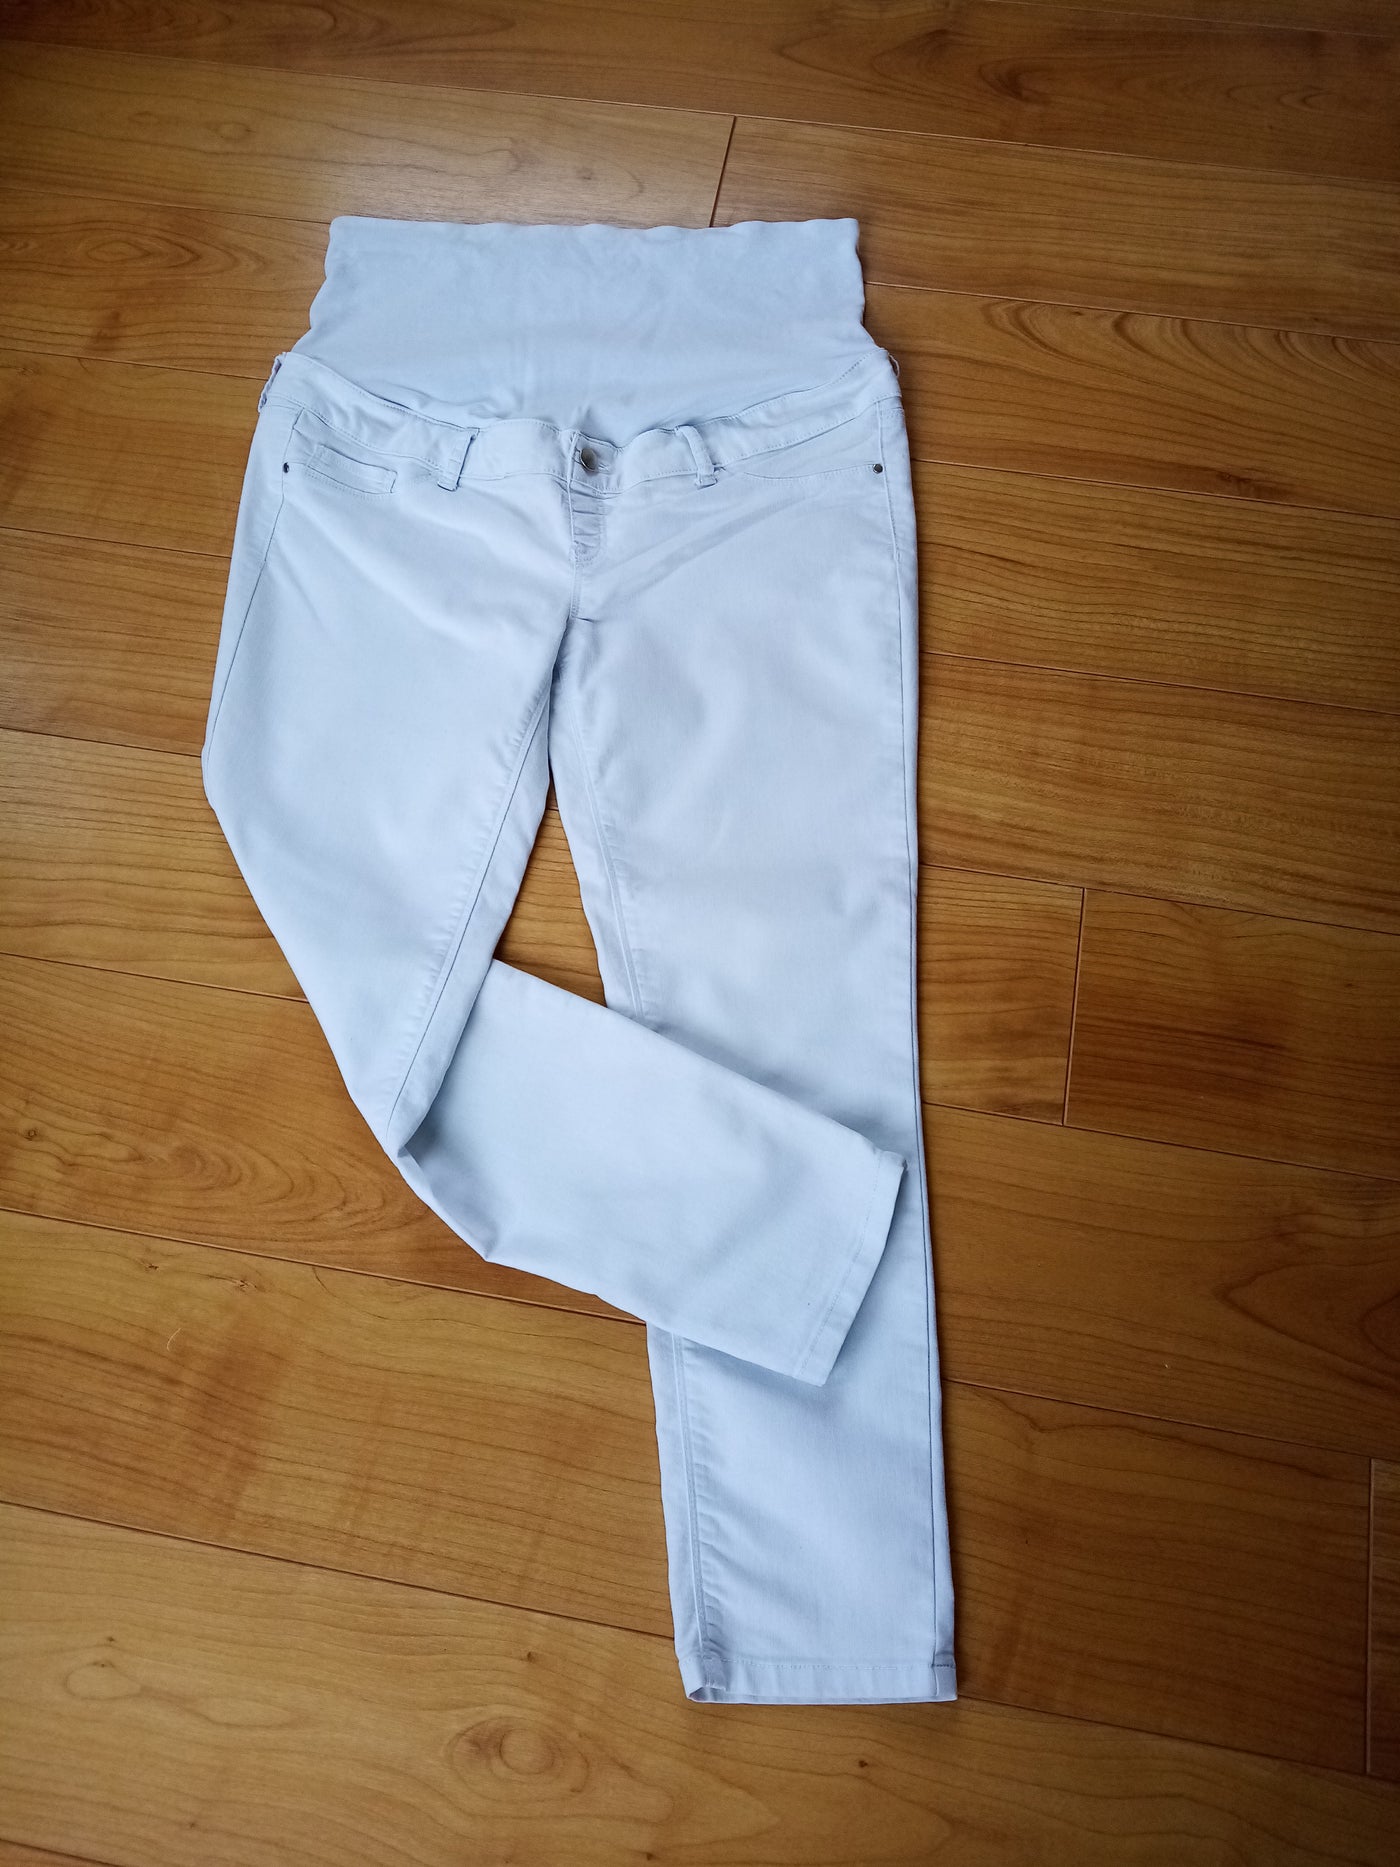 Dorothy Perkins Maternity White Over Bump Jeans - Size 14